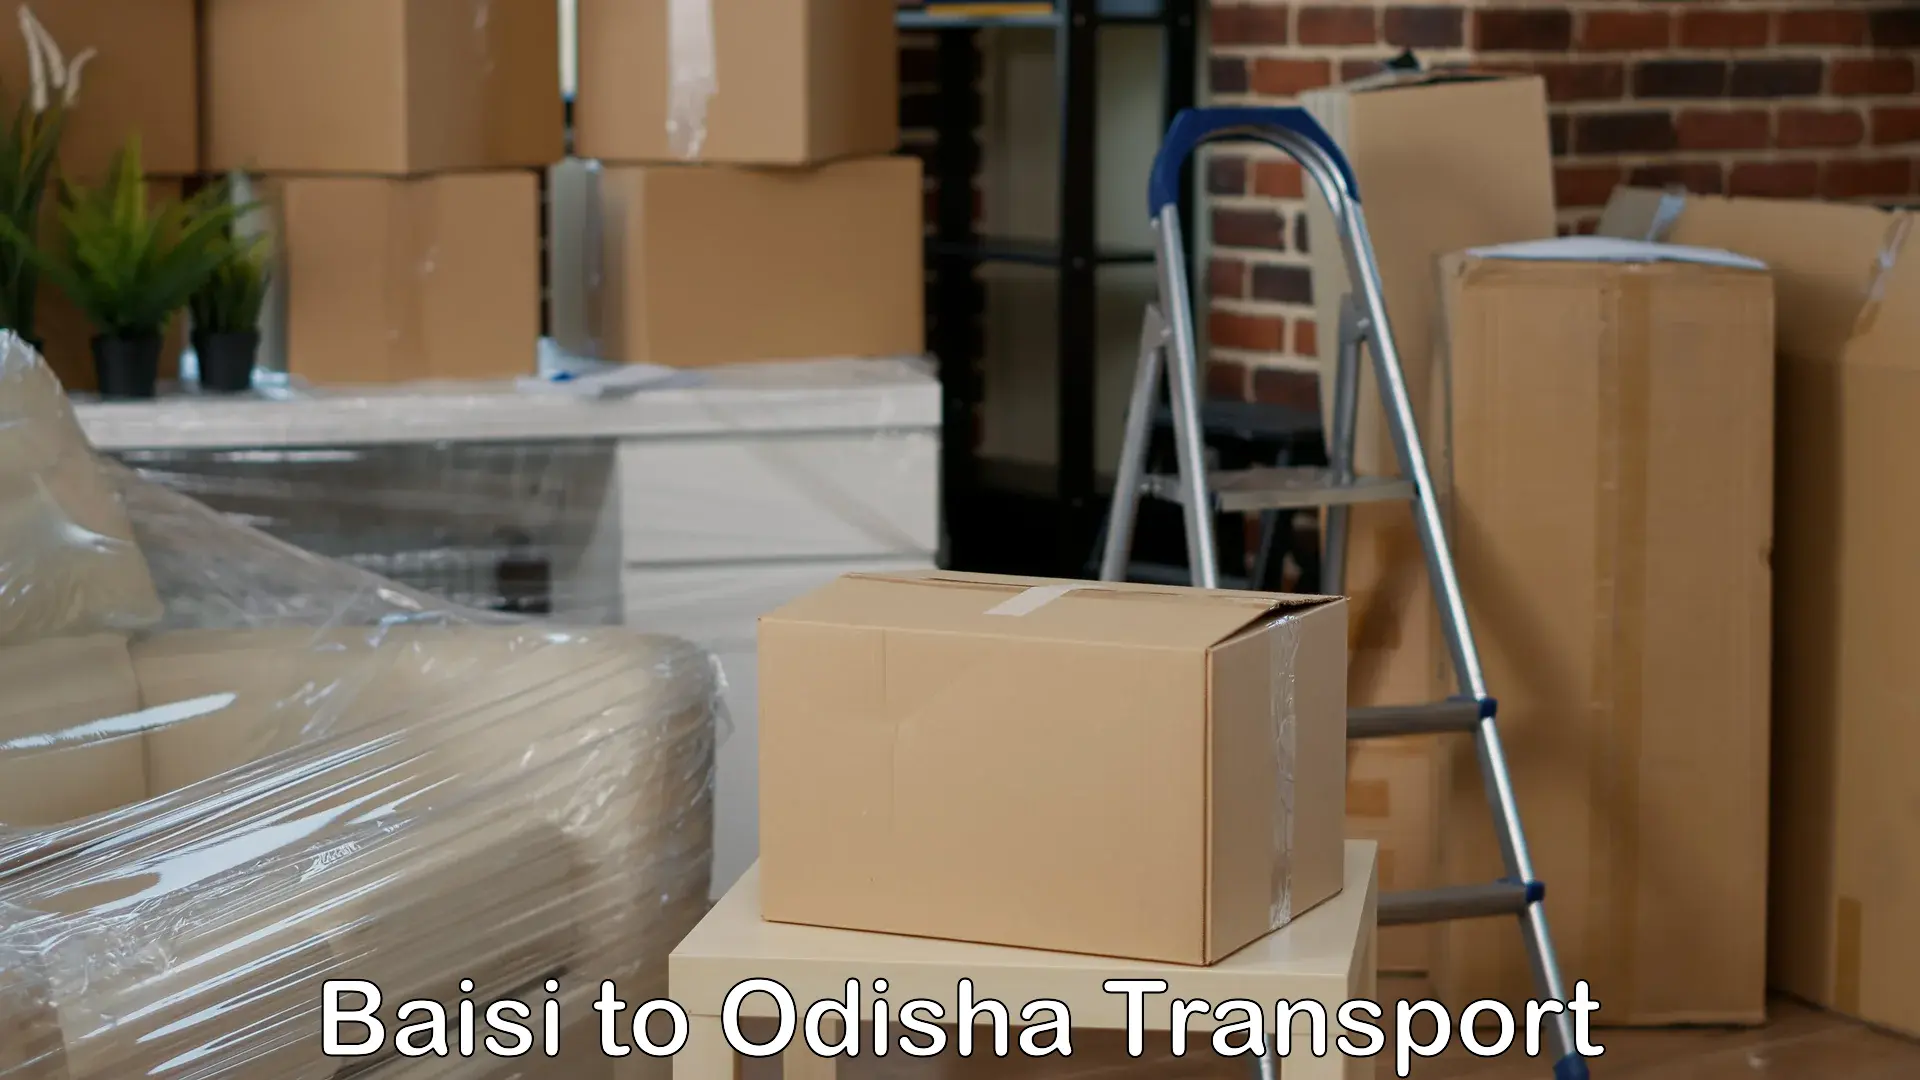 Cargo transport services in Baisi to Paradip Port